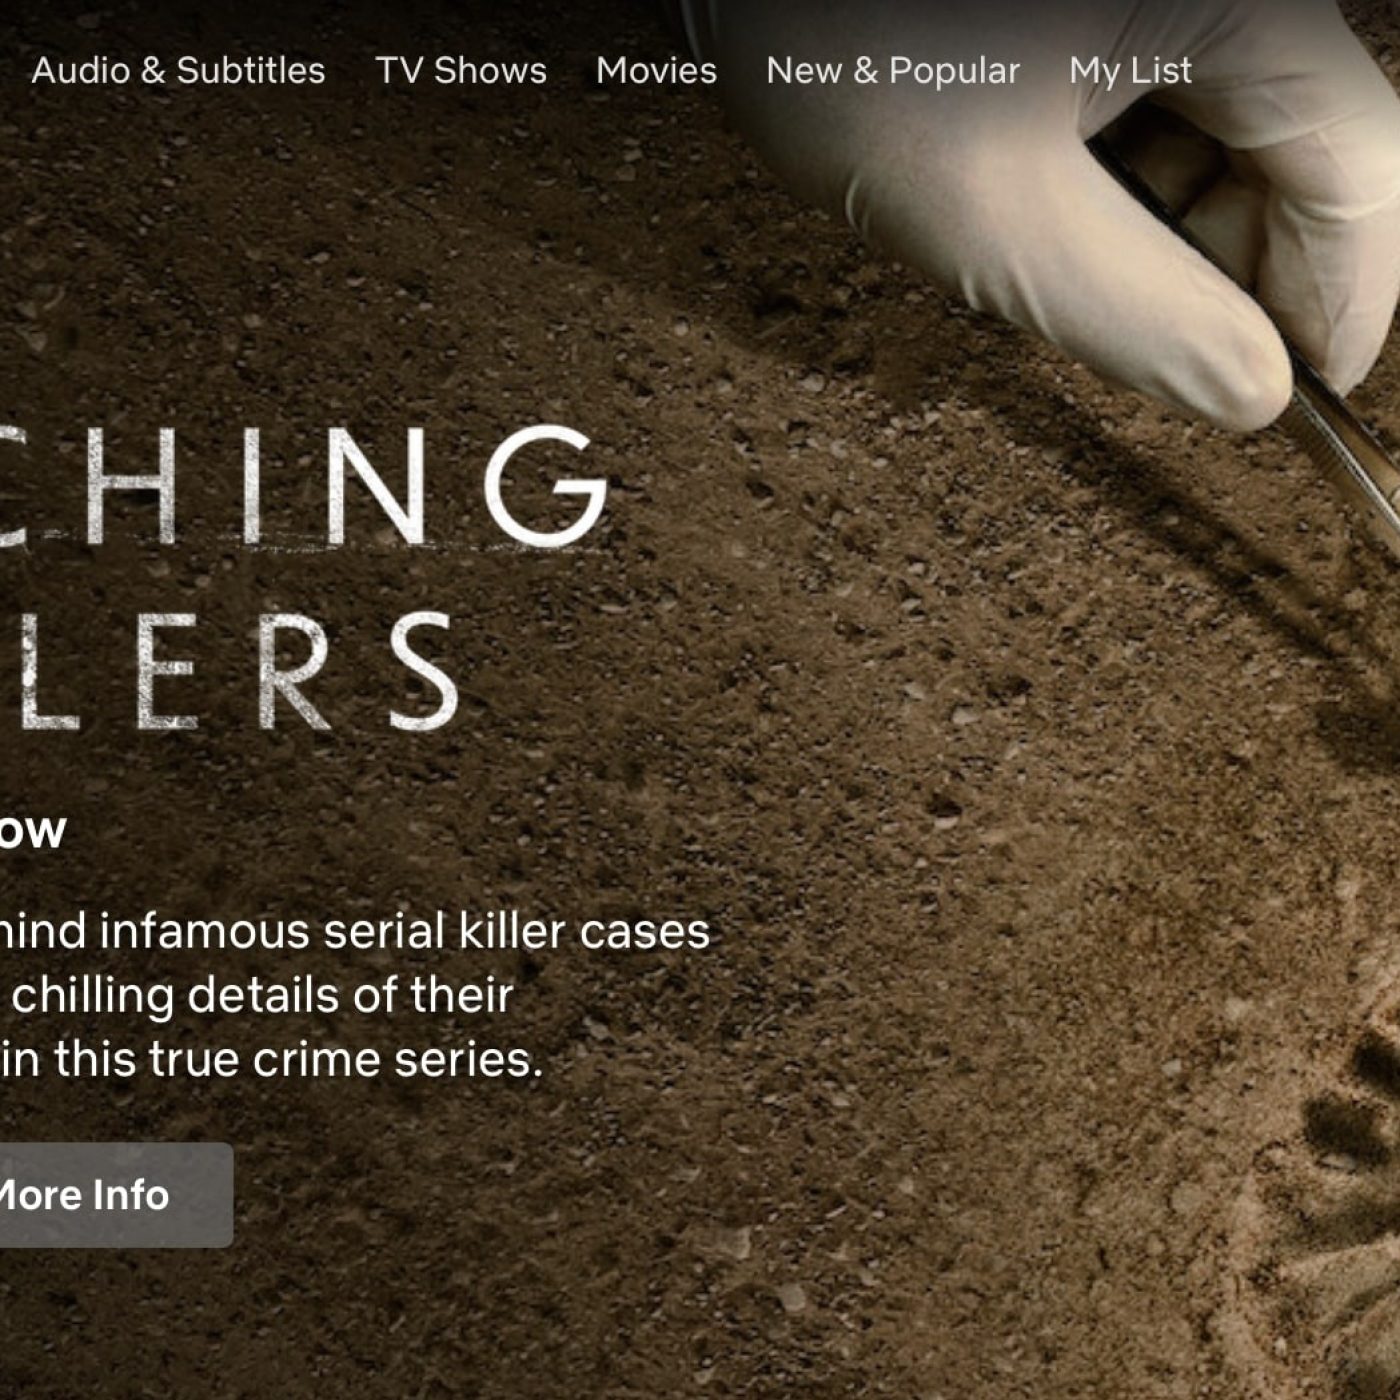 Catching Killers: Netflix just added a new season of this true